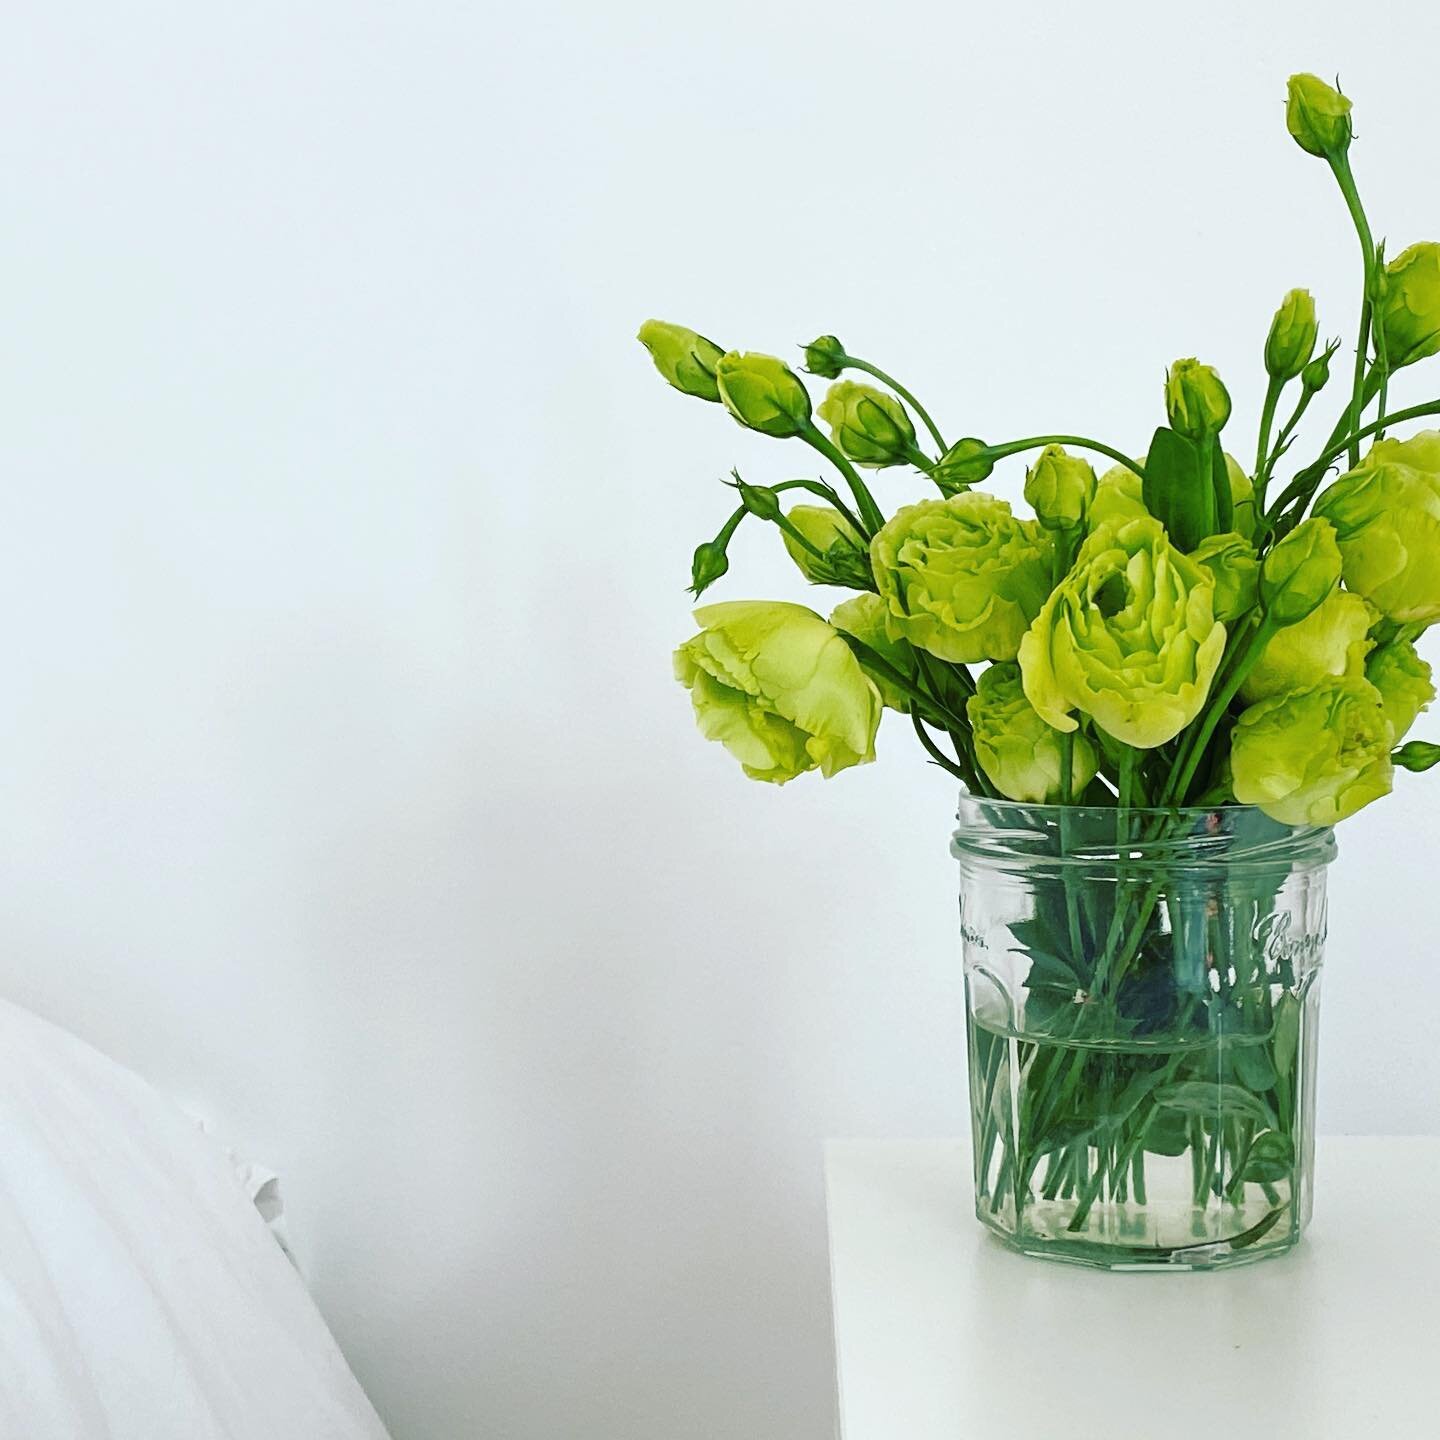 My weekly fresh flowers.
I love to see my small vase of flowers when I go to sleep and, it's the first thing that I see when I wake up.
What makes you smile when you wake up?
.
.
.
#flowers #cozyhome #smile #50andrising #estorildiary #goodmood #cozy 